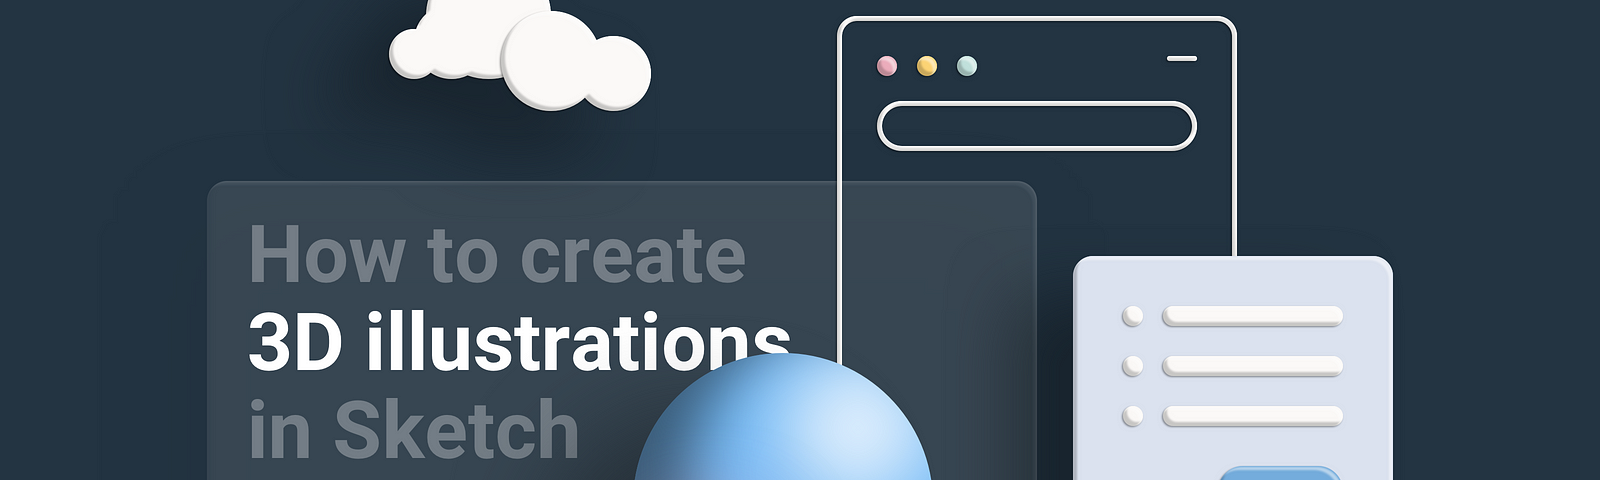 3D illustration of some UI elements, two spheres and a cloud hovering over dark background